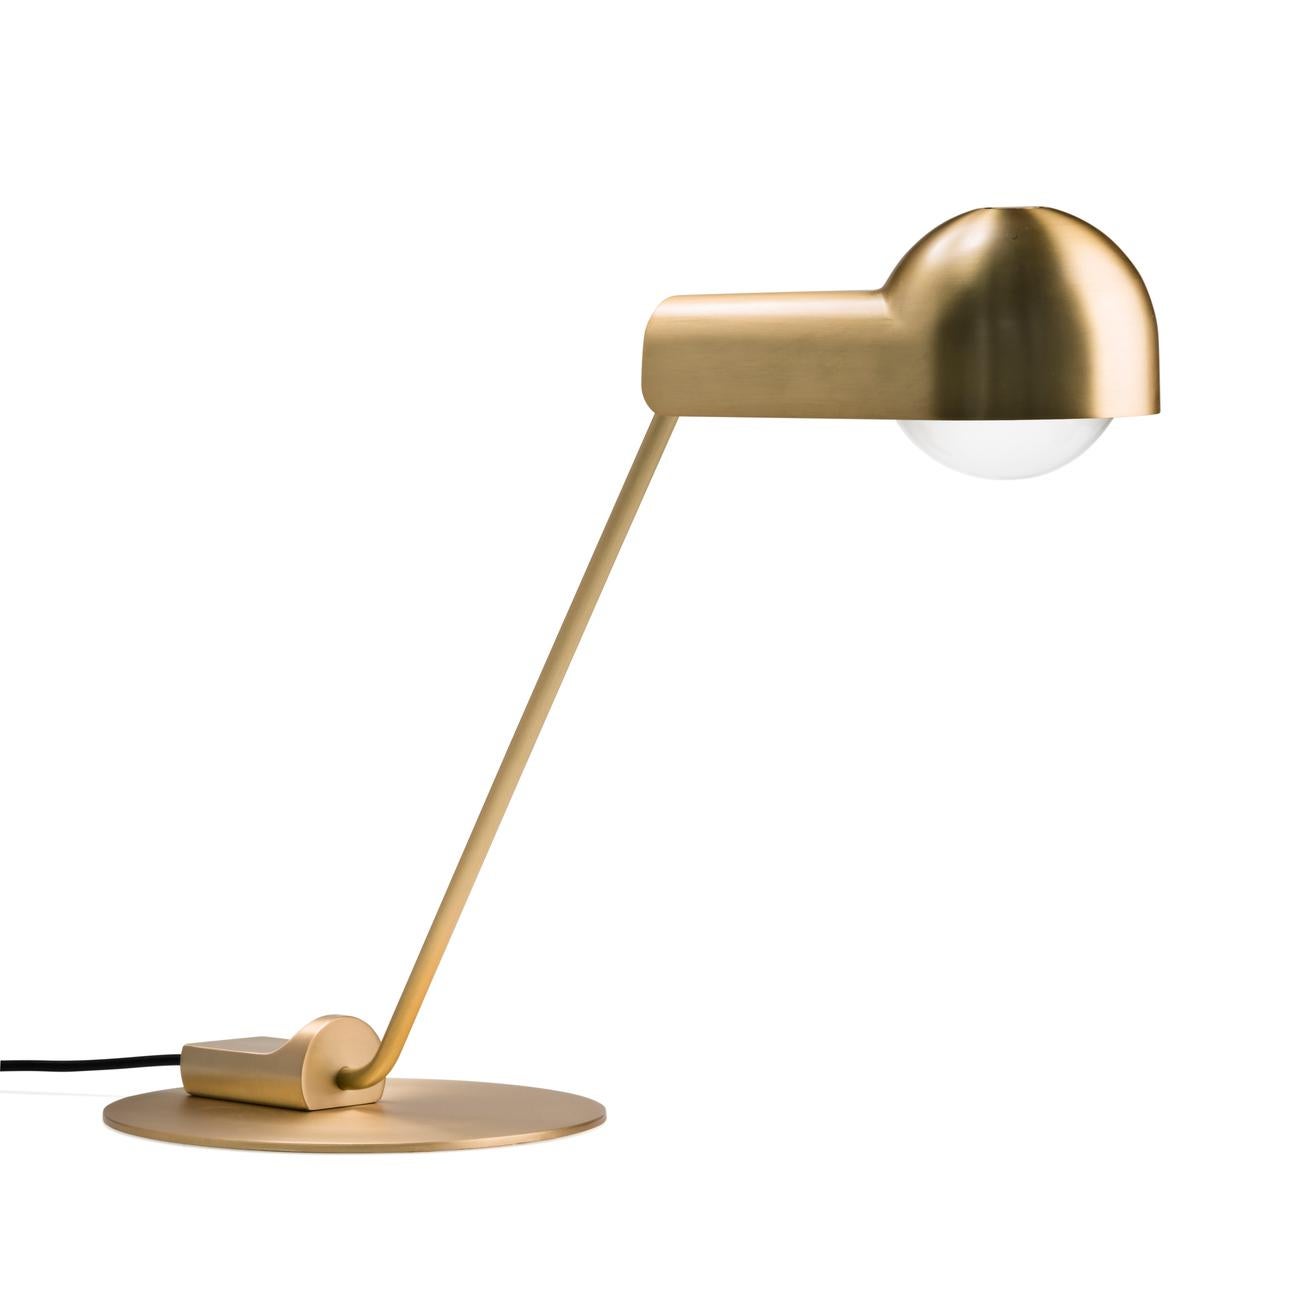 Set of Two Joe Colombo 'Domo' Brass Table Lamps by Karakter In New Condition For Sale In Barcelona, Barcelona